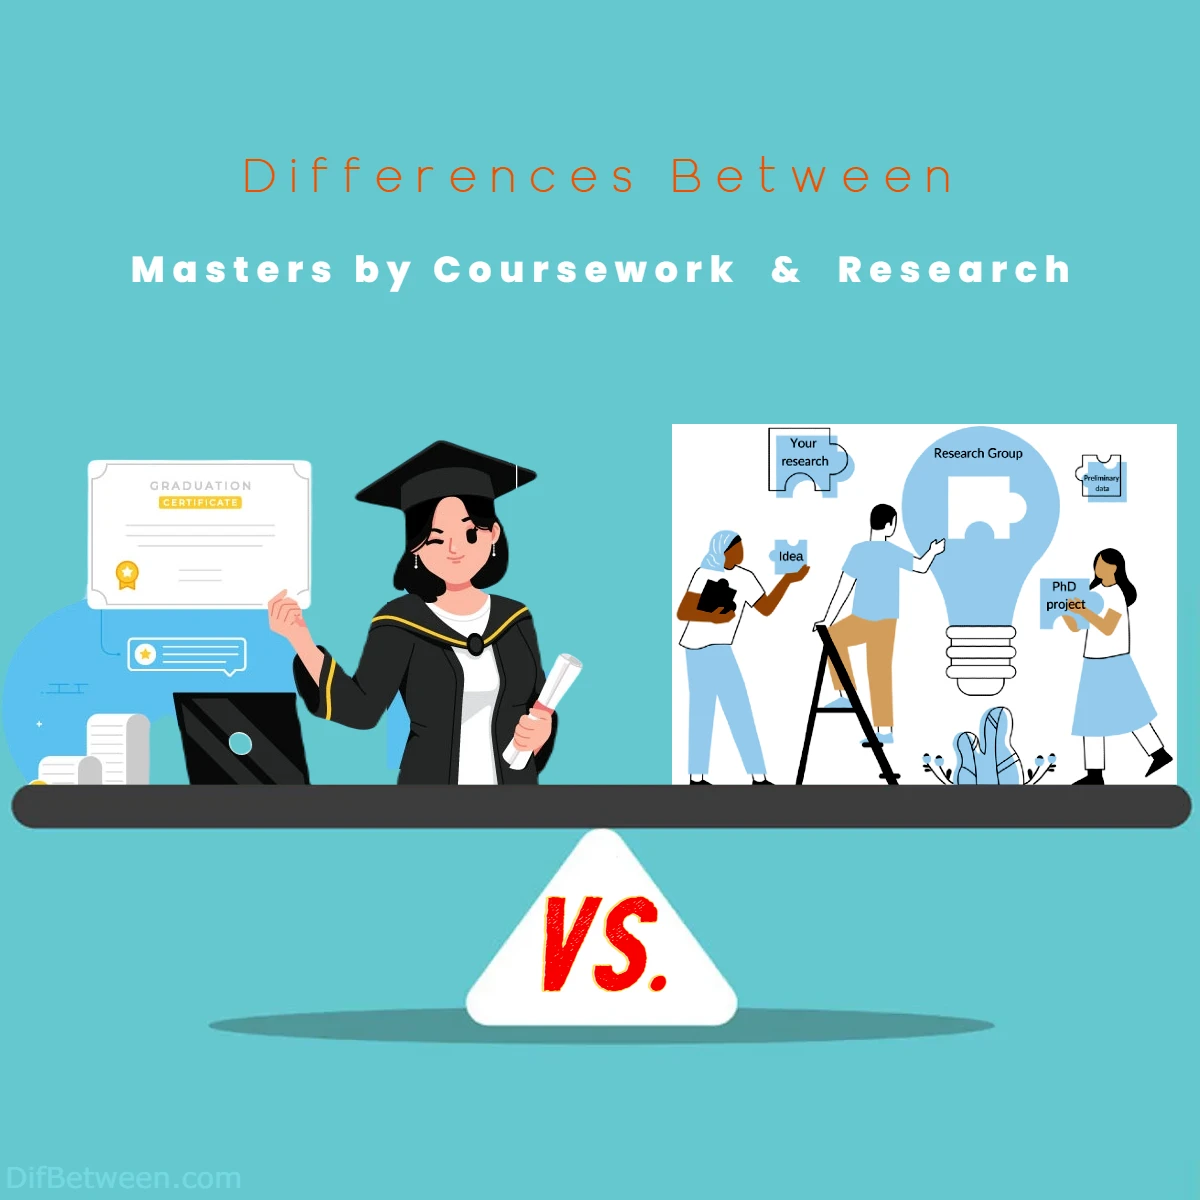 Differences Between Masters by Coursework vs Research